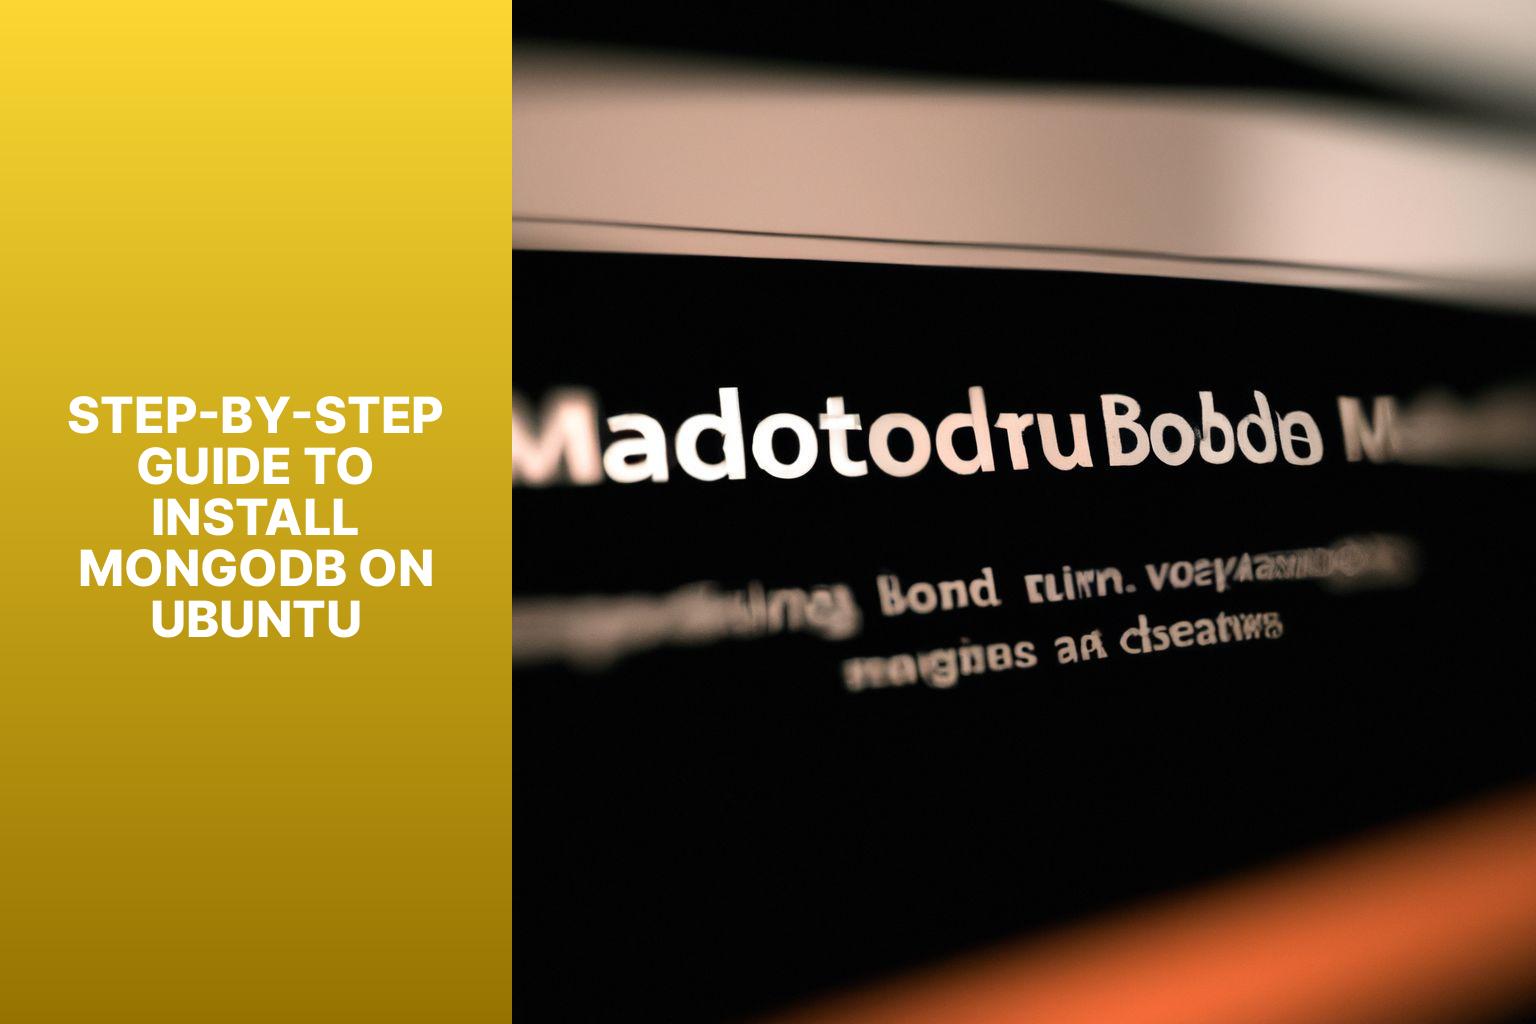 Step-by-Step Guide to Install MongoDB on Ubuntu - how to install mongodb ubuntu 